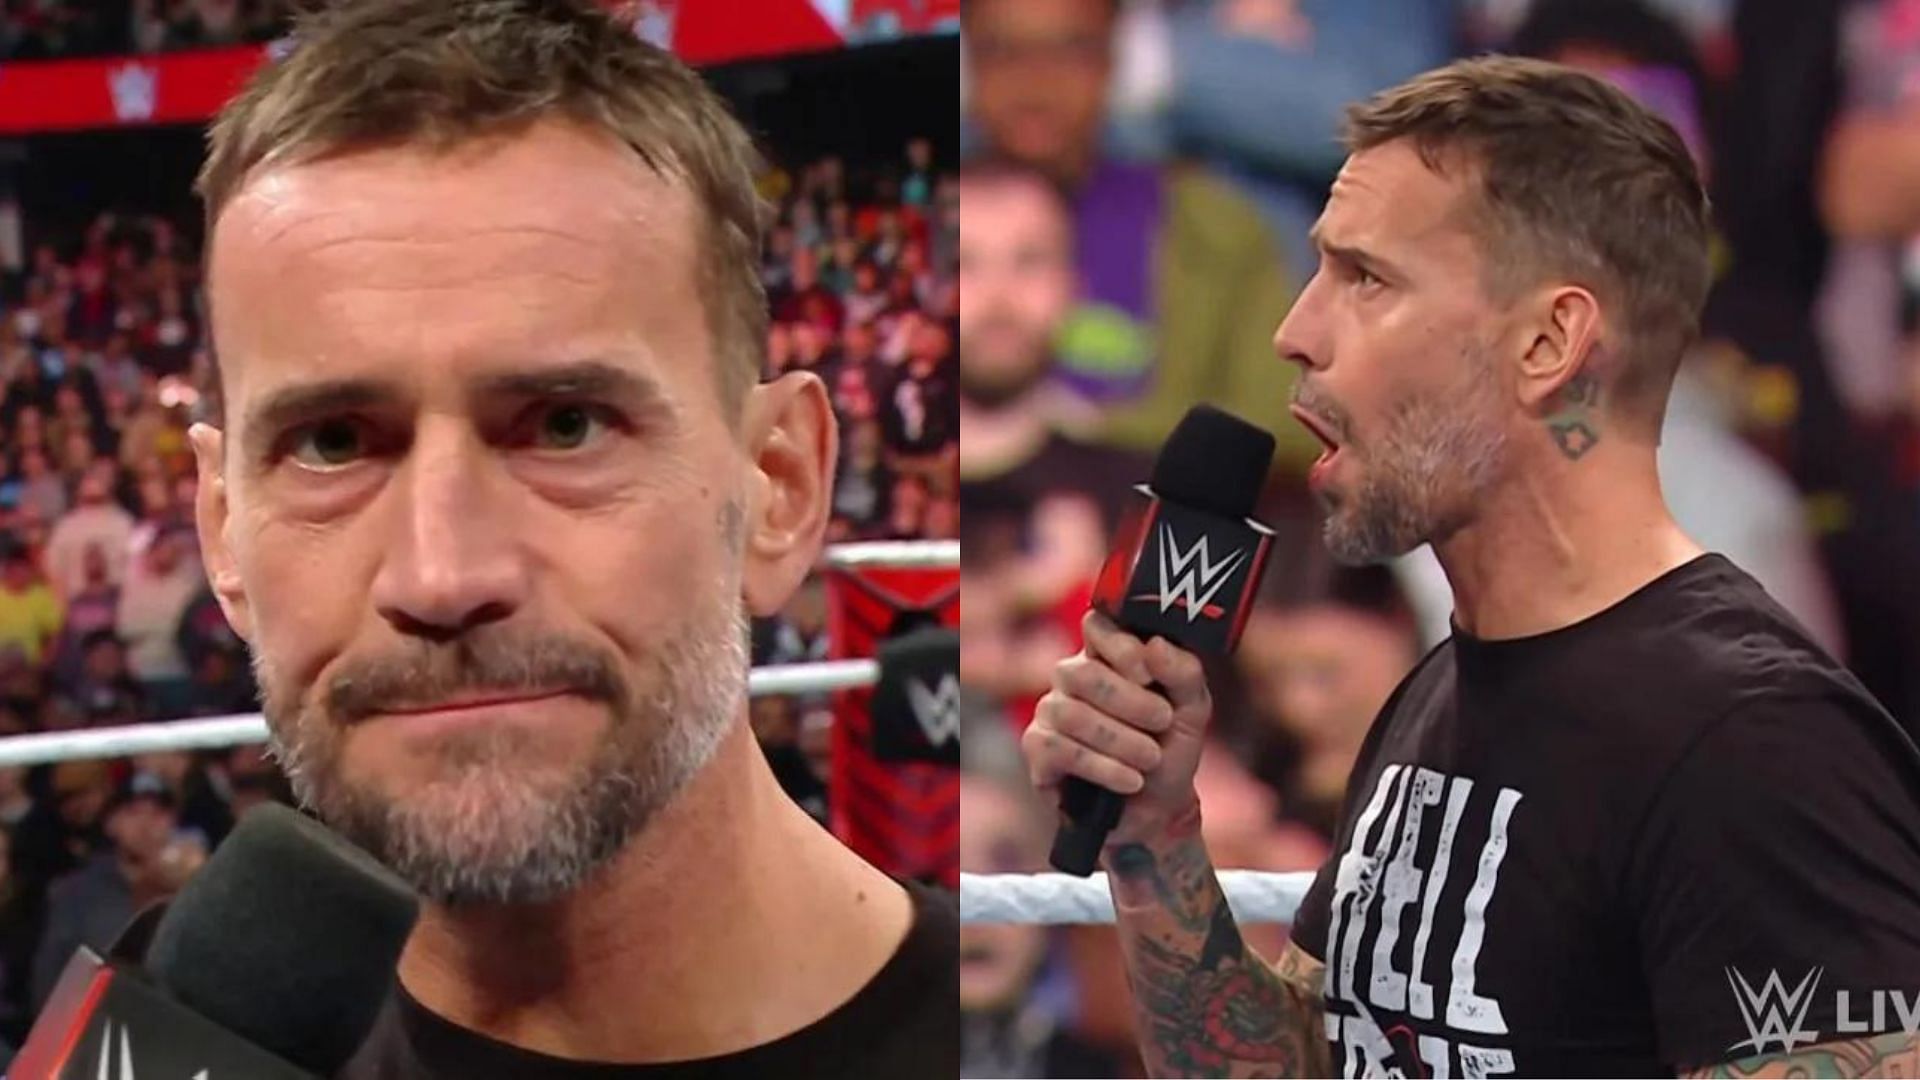 CM Punk will be taking part in next year